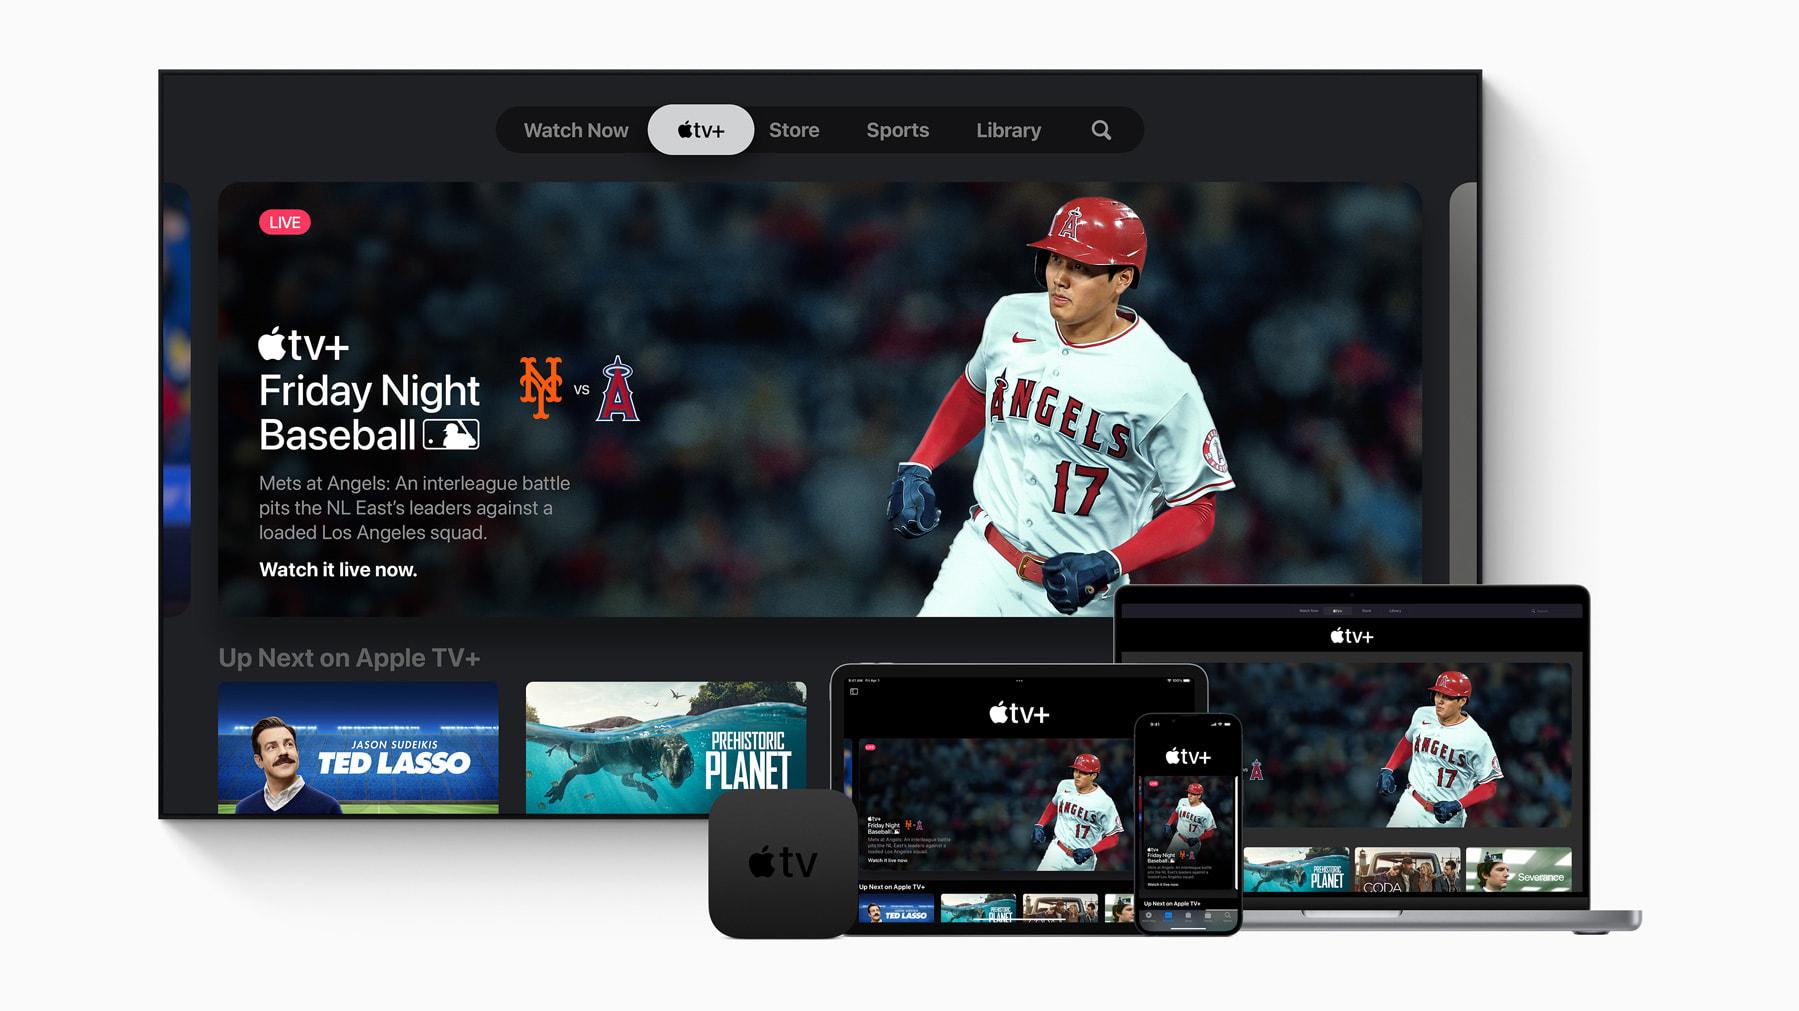 Apple and Major League announce “Friday Night Baseball” schedule